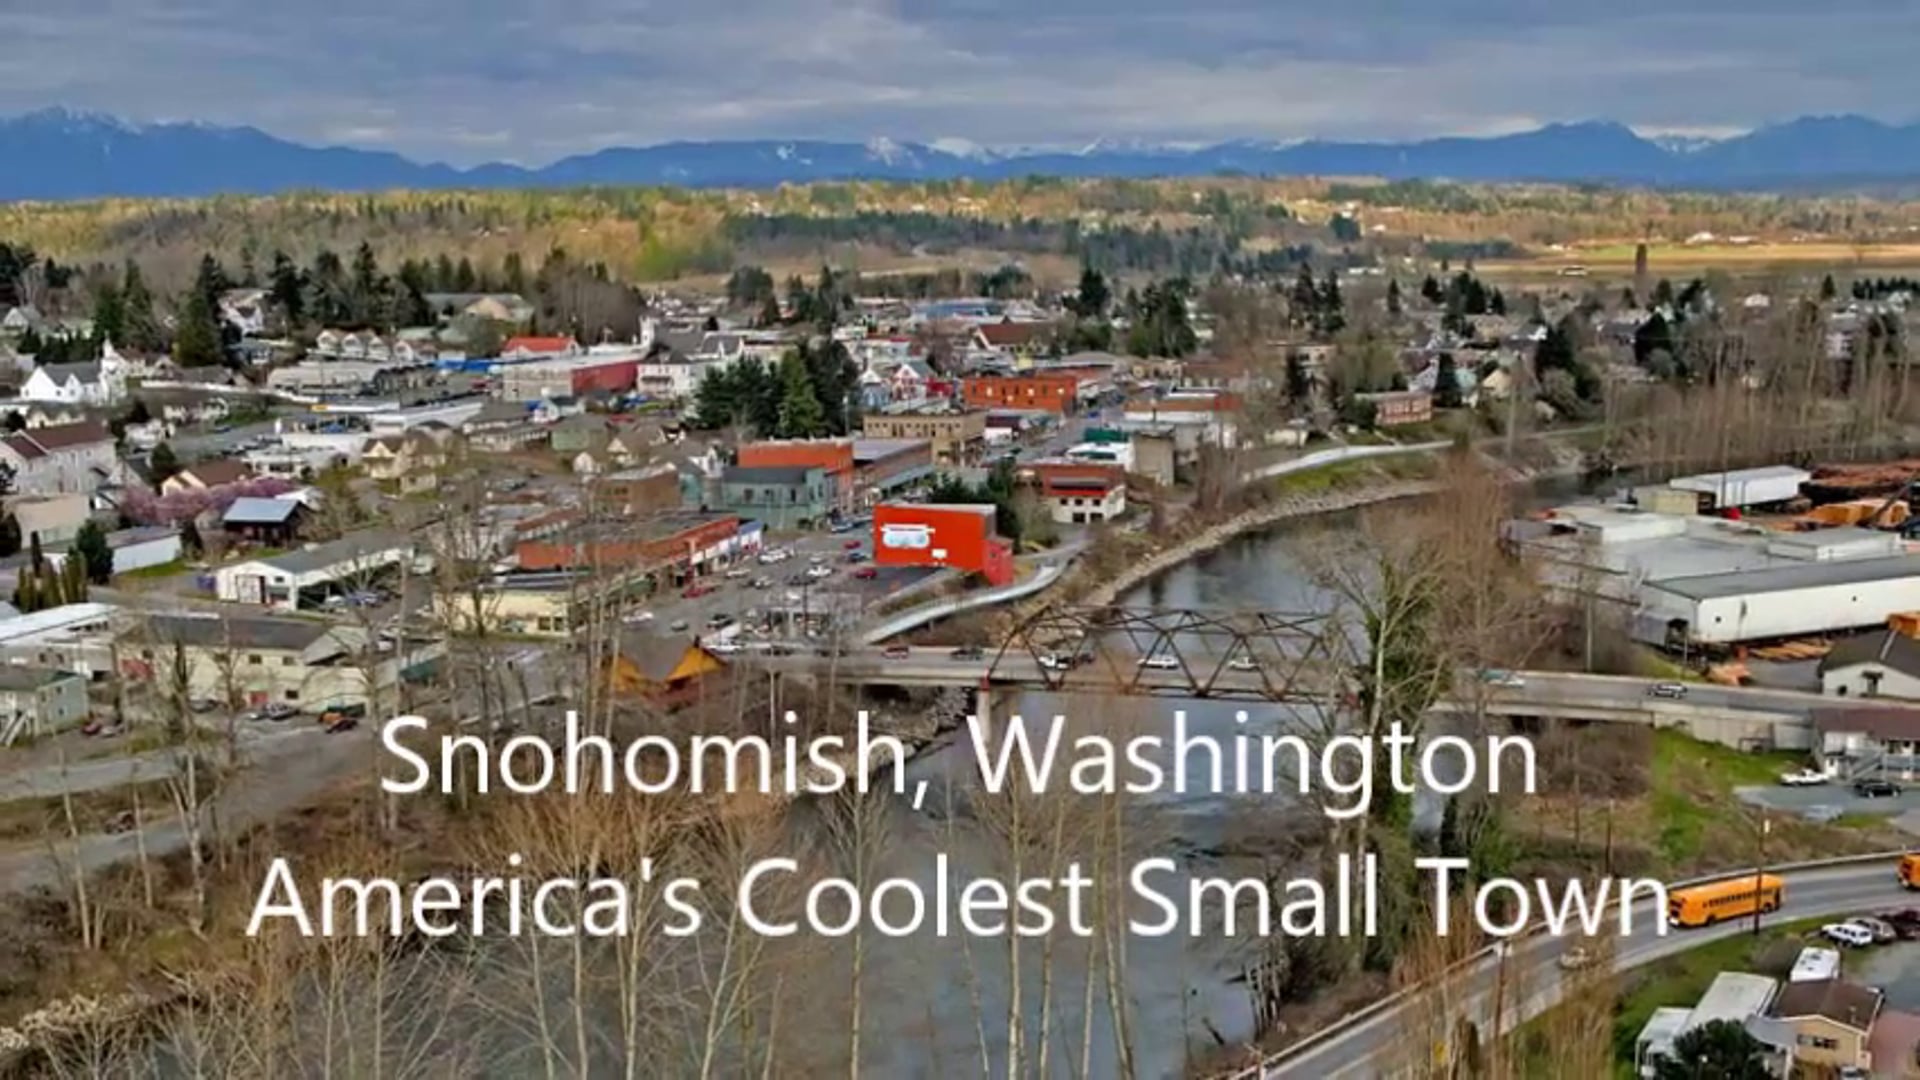 Snohomish: America's Coolest Small Town